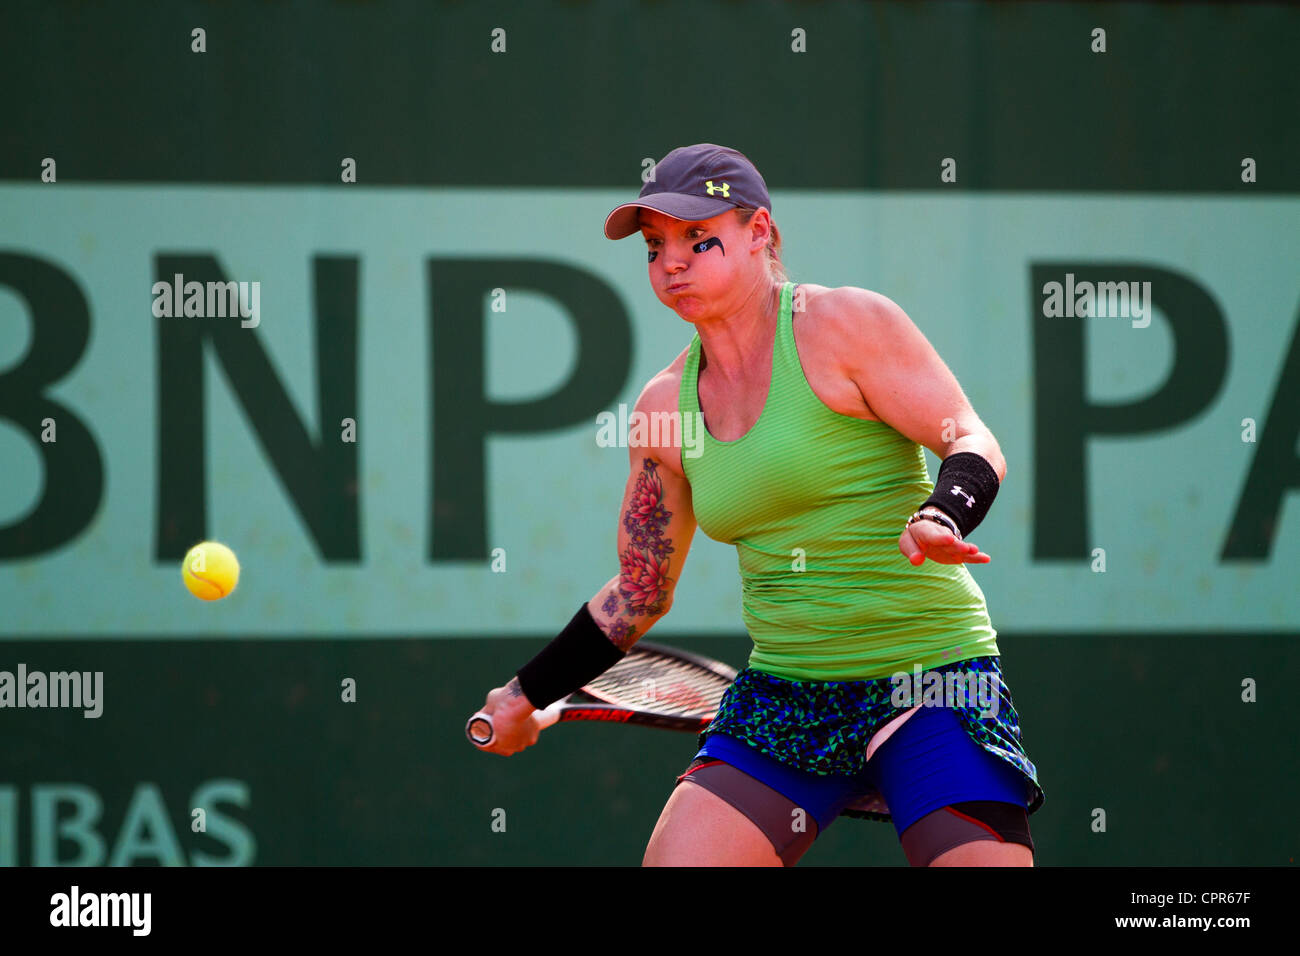 30.05.2012 Paris, France. Bethanie Mattek-Sands in action against Sloane Stephens on day 4 of the French Open Tennis from Roland Garros. Stock Photo